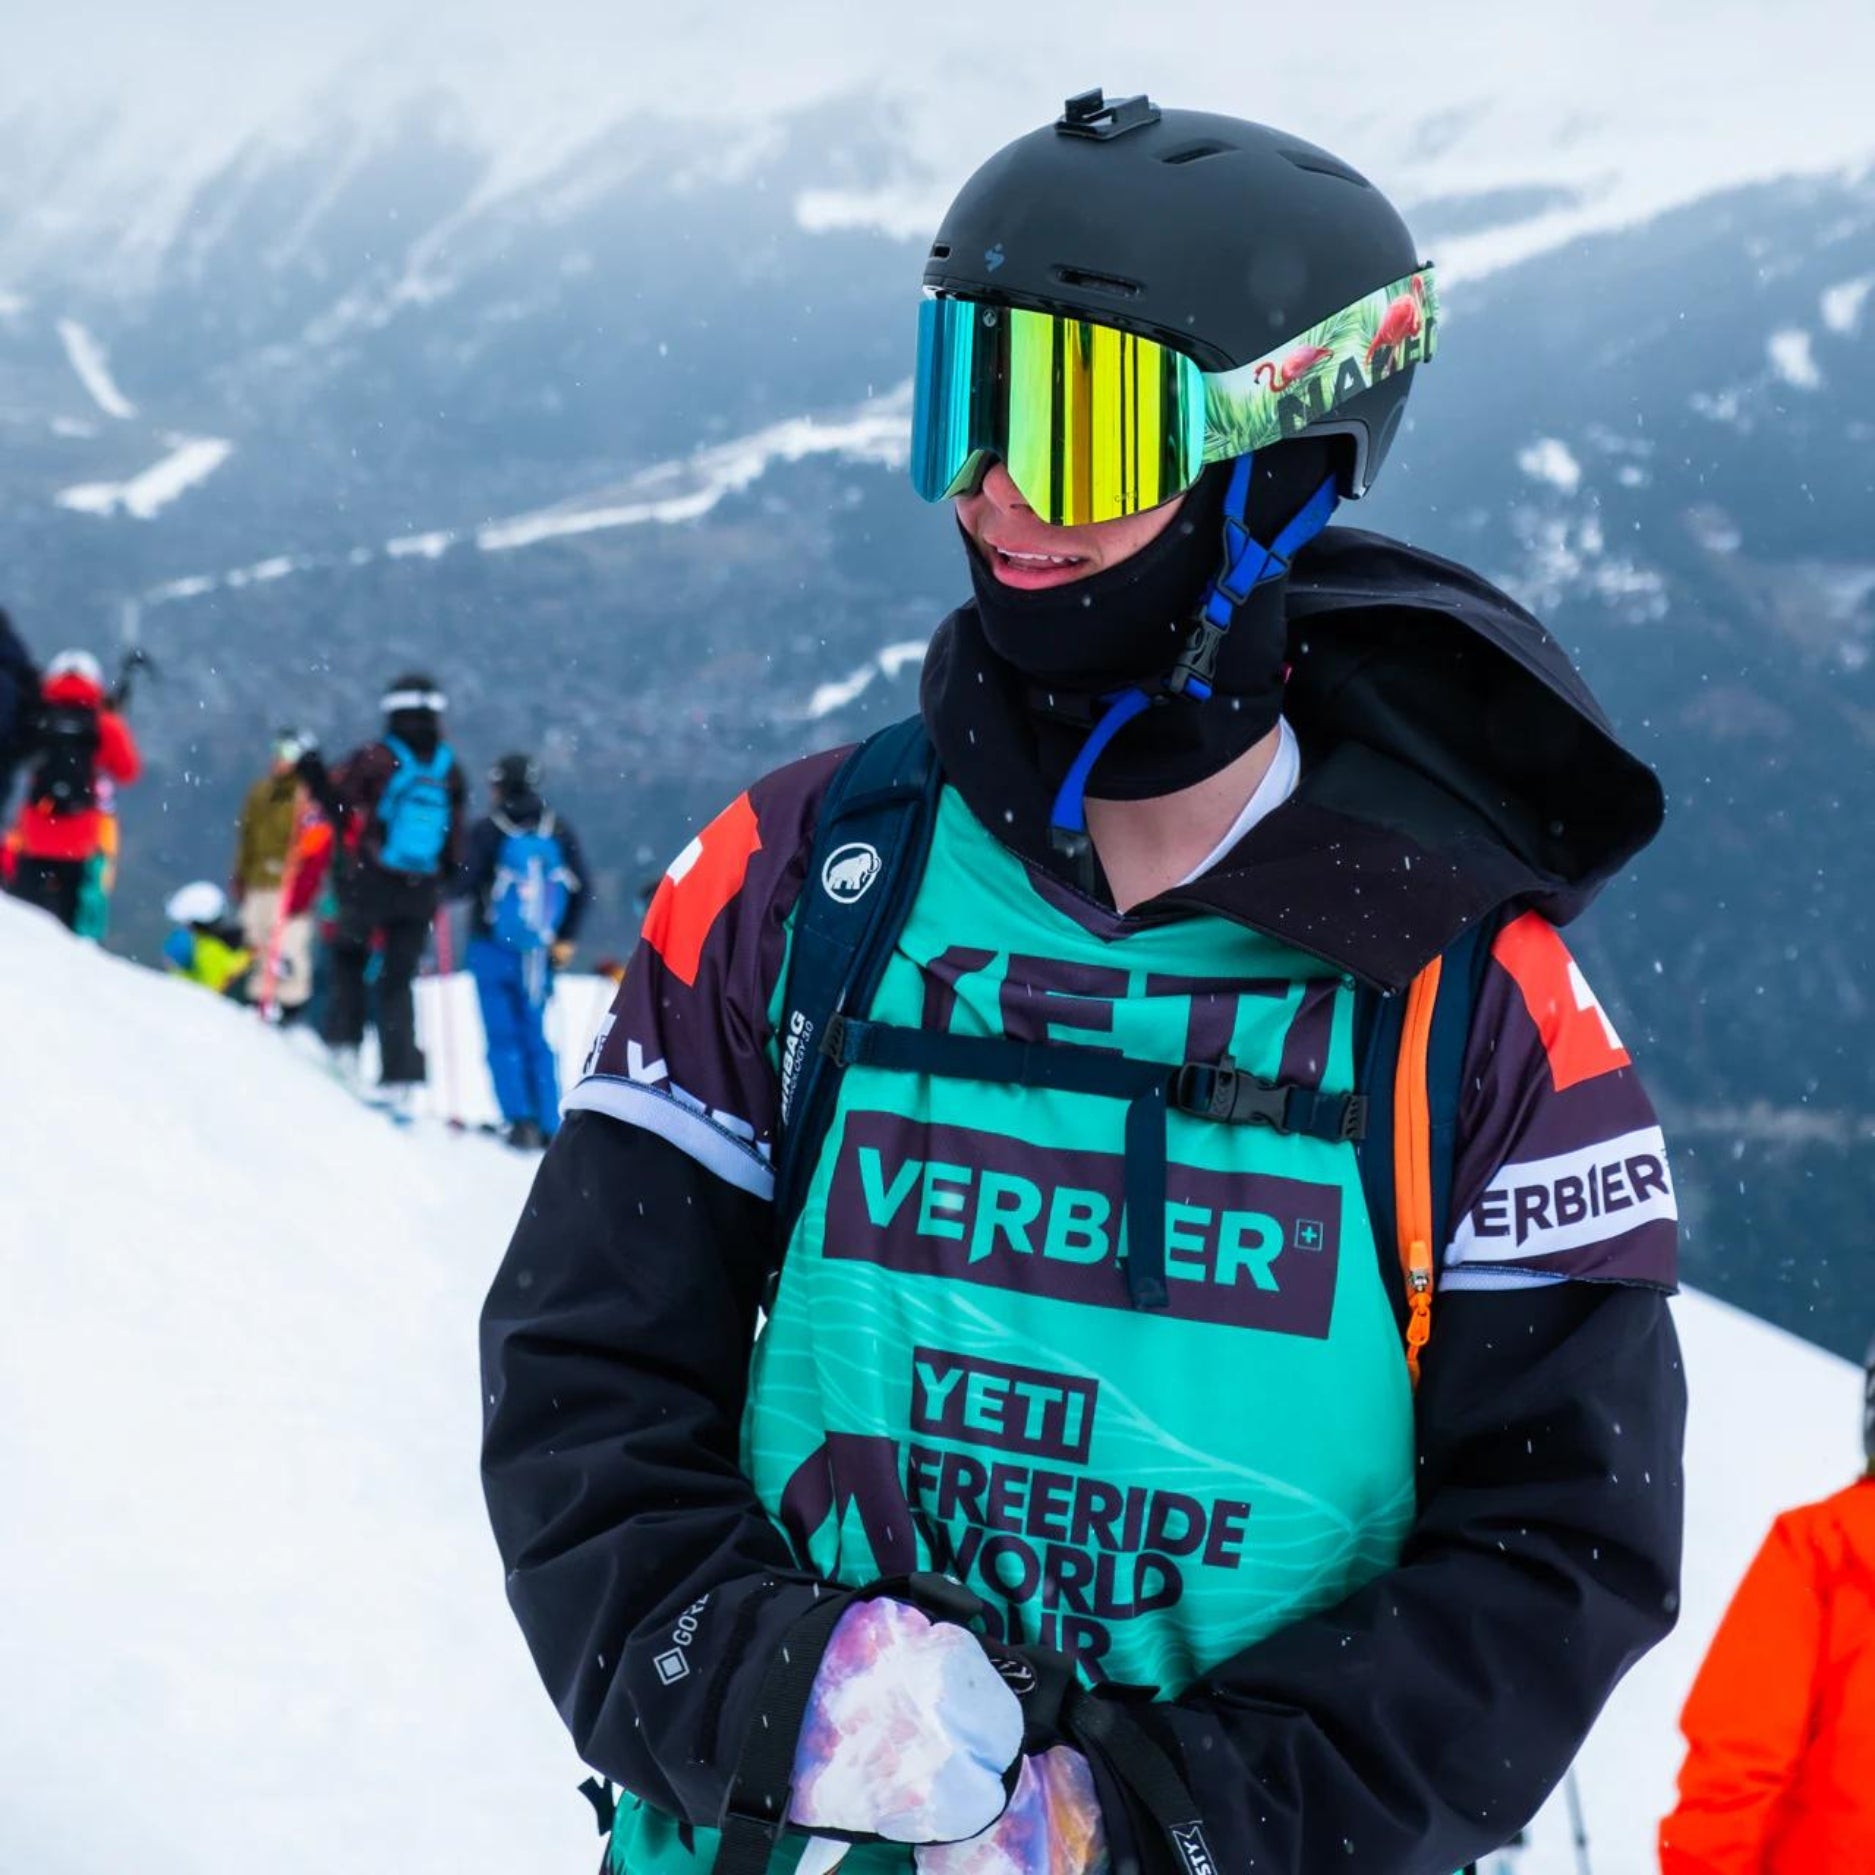 A Competition Weekend on the Freeride Junior World Tour